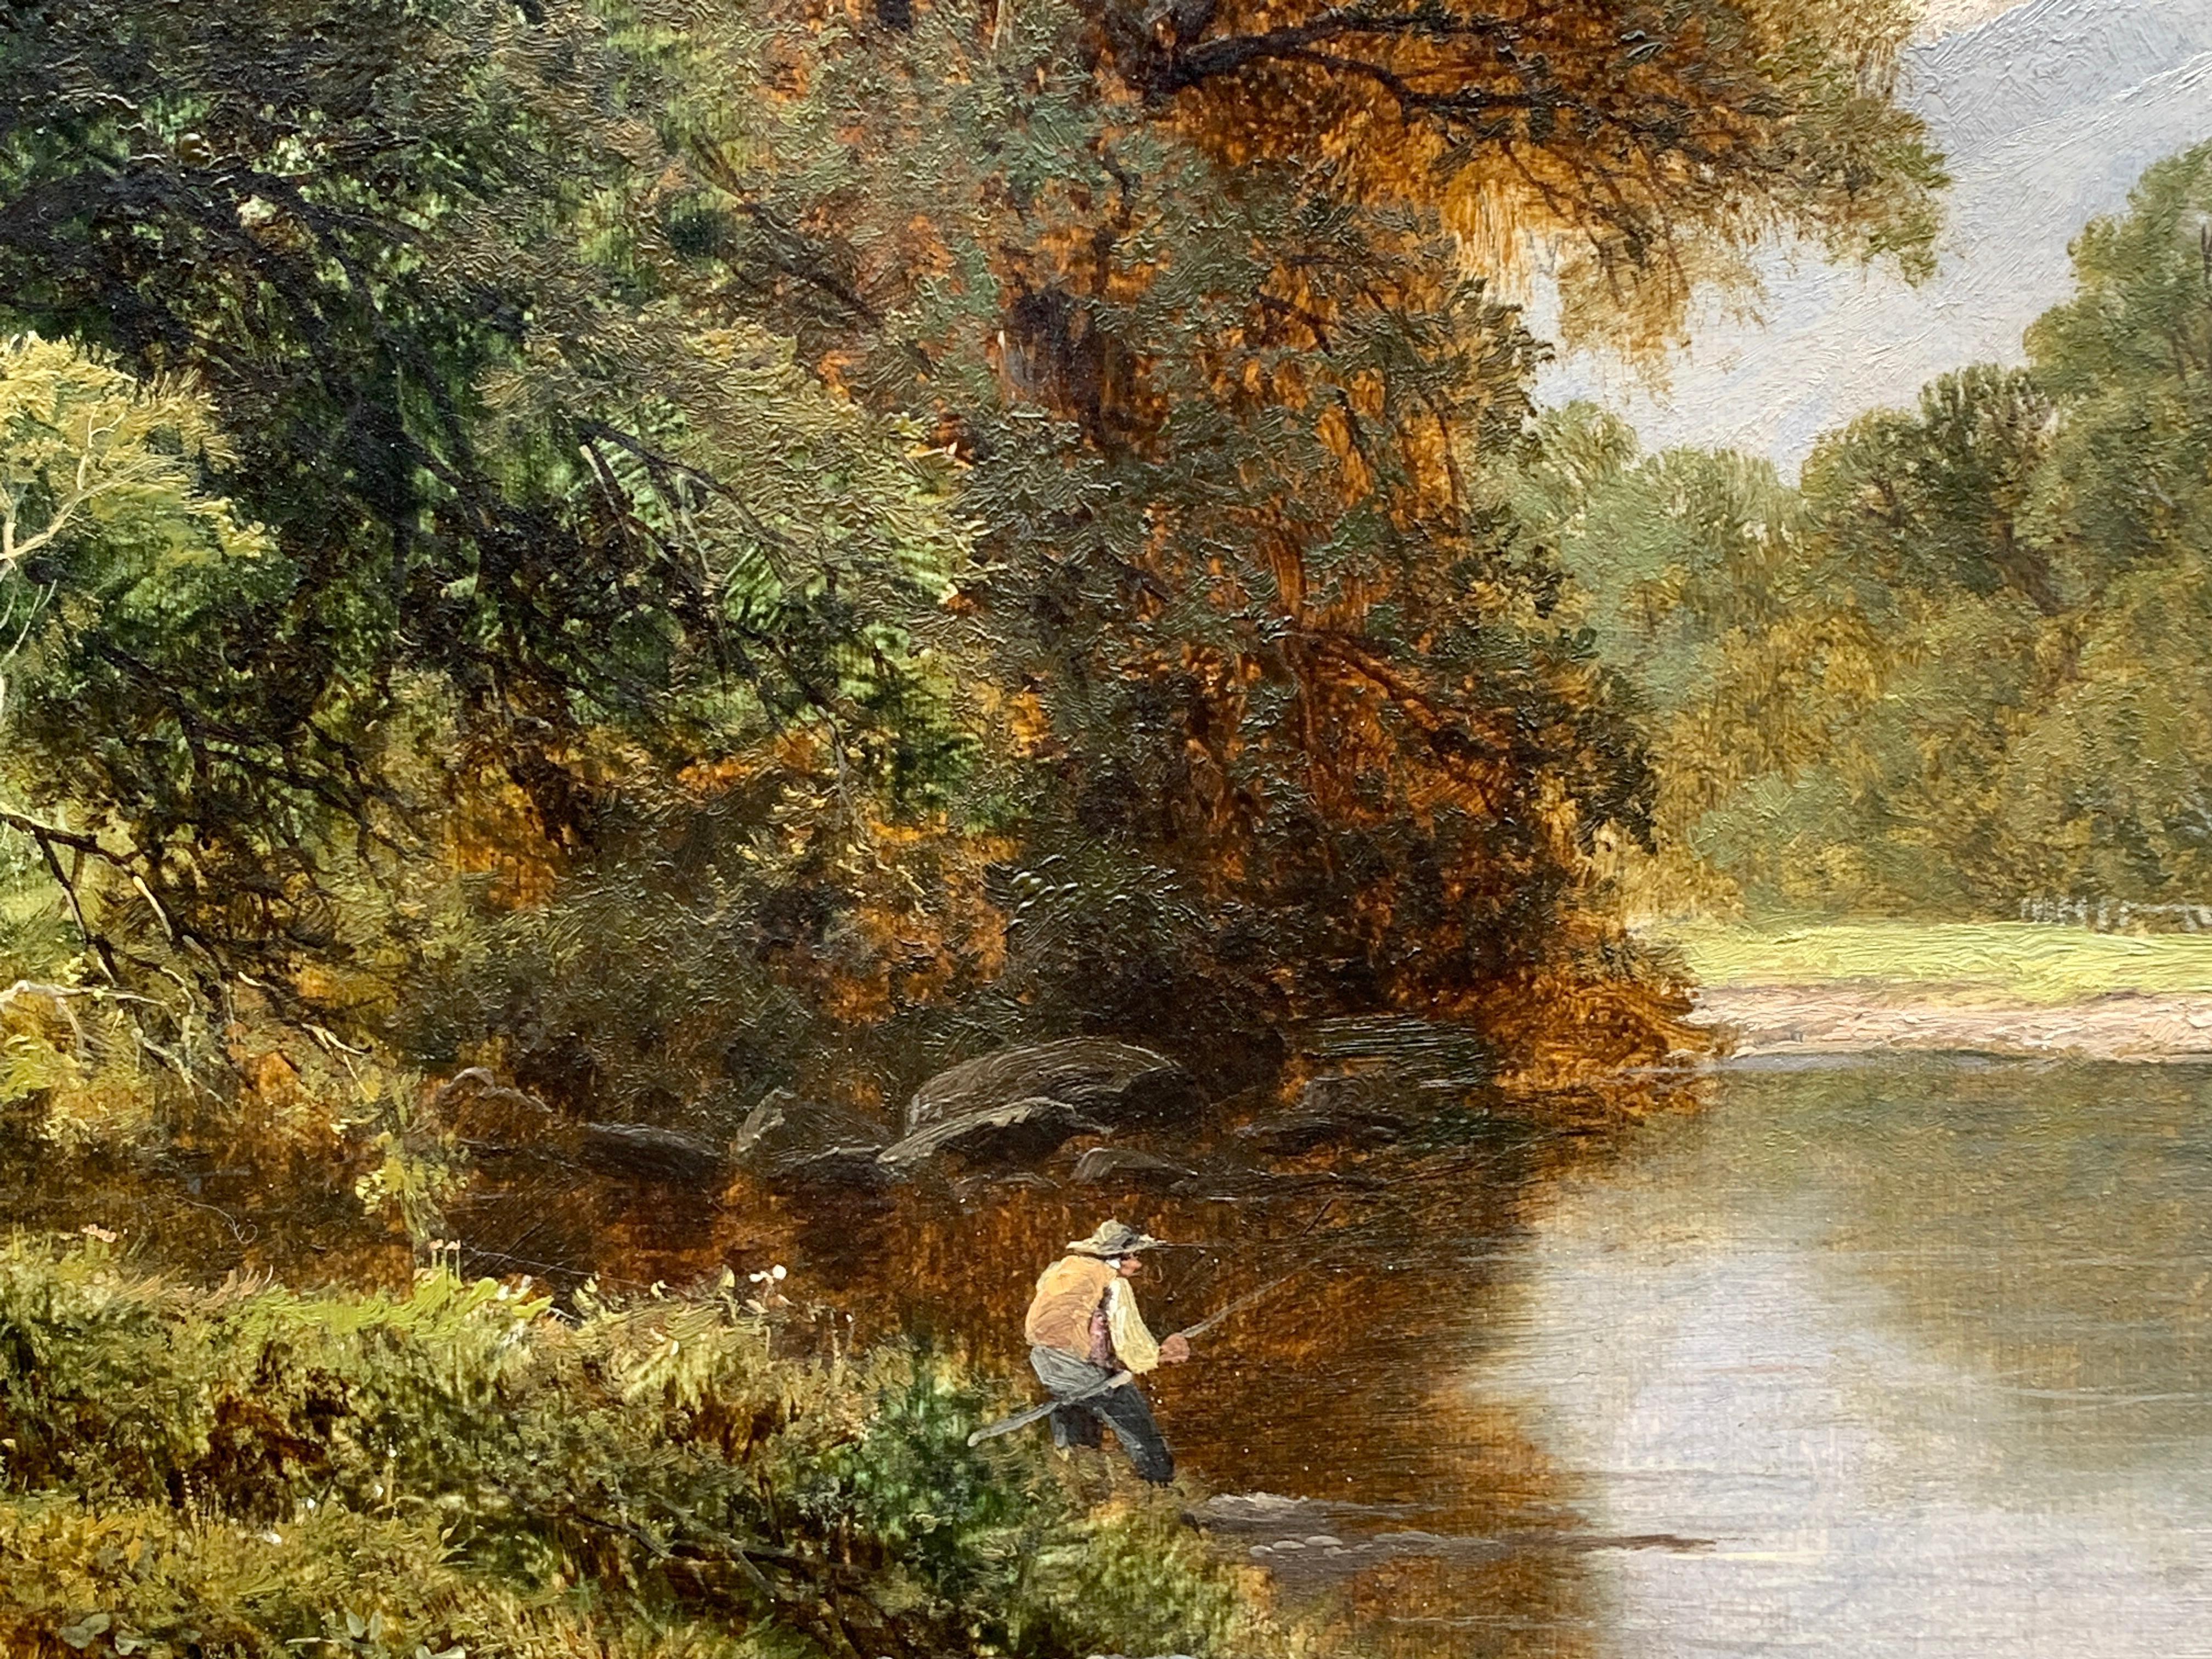 English River Landscape with fisherman, 19th century, in Dolgellau, North Wales - Victorian Painting by Thomas Stanley Barber